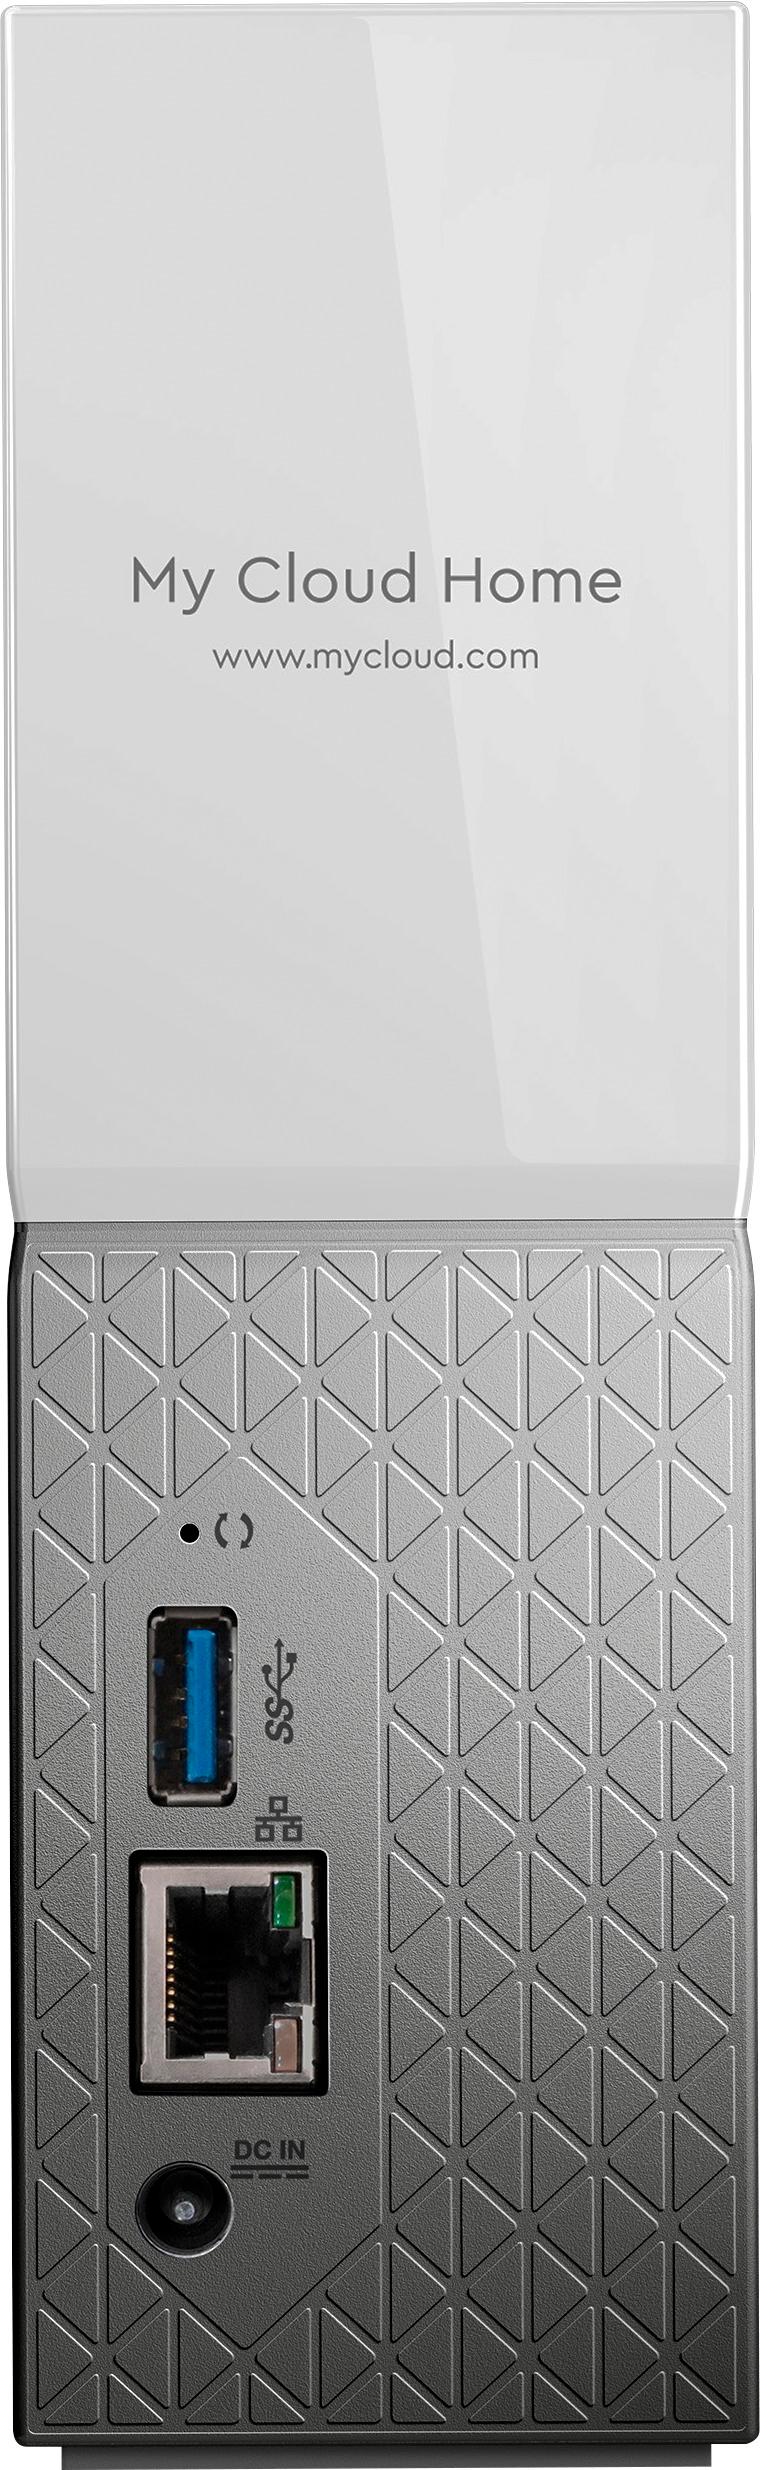 My Cloud Home: Personal Cloud Storage from 2 TB to 8 TB